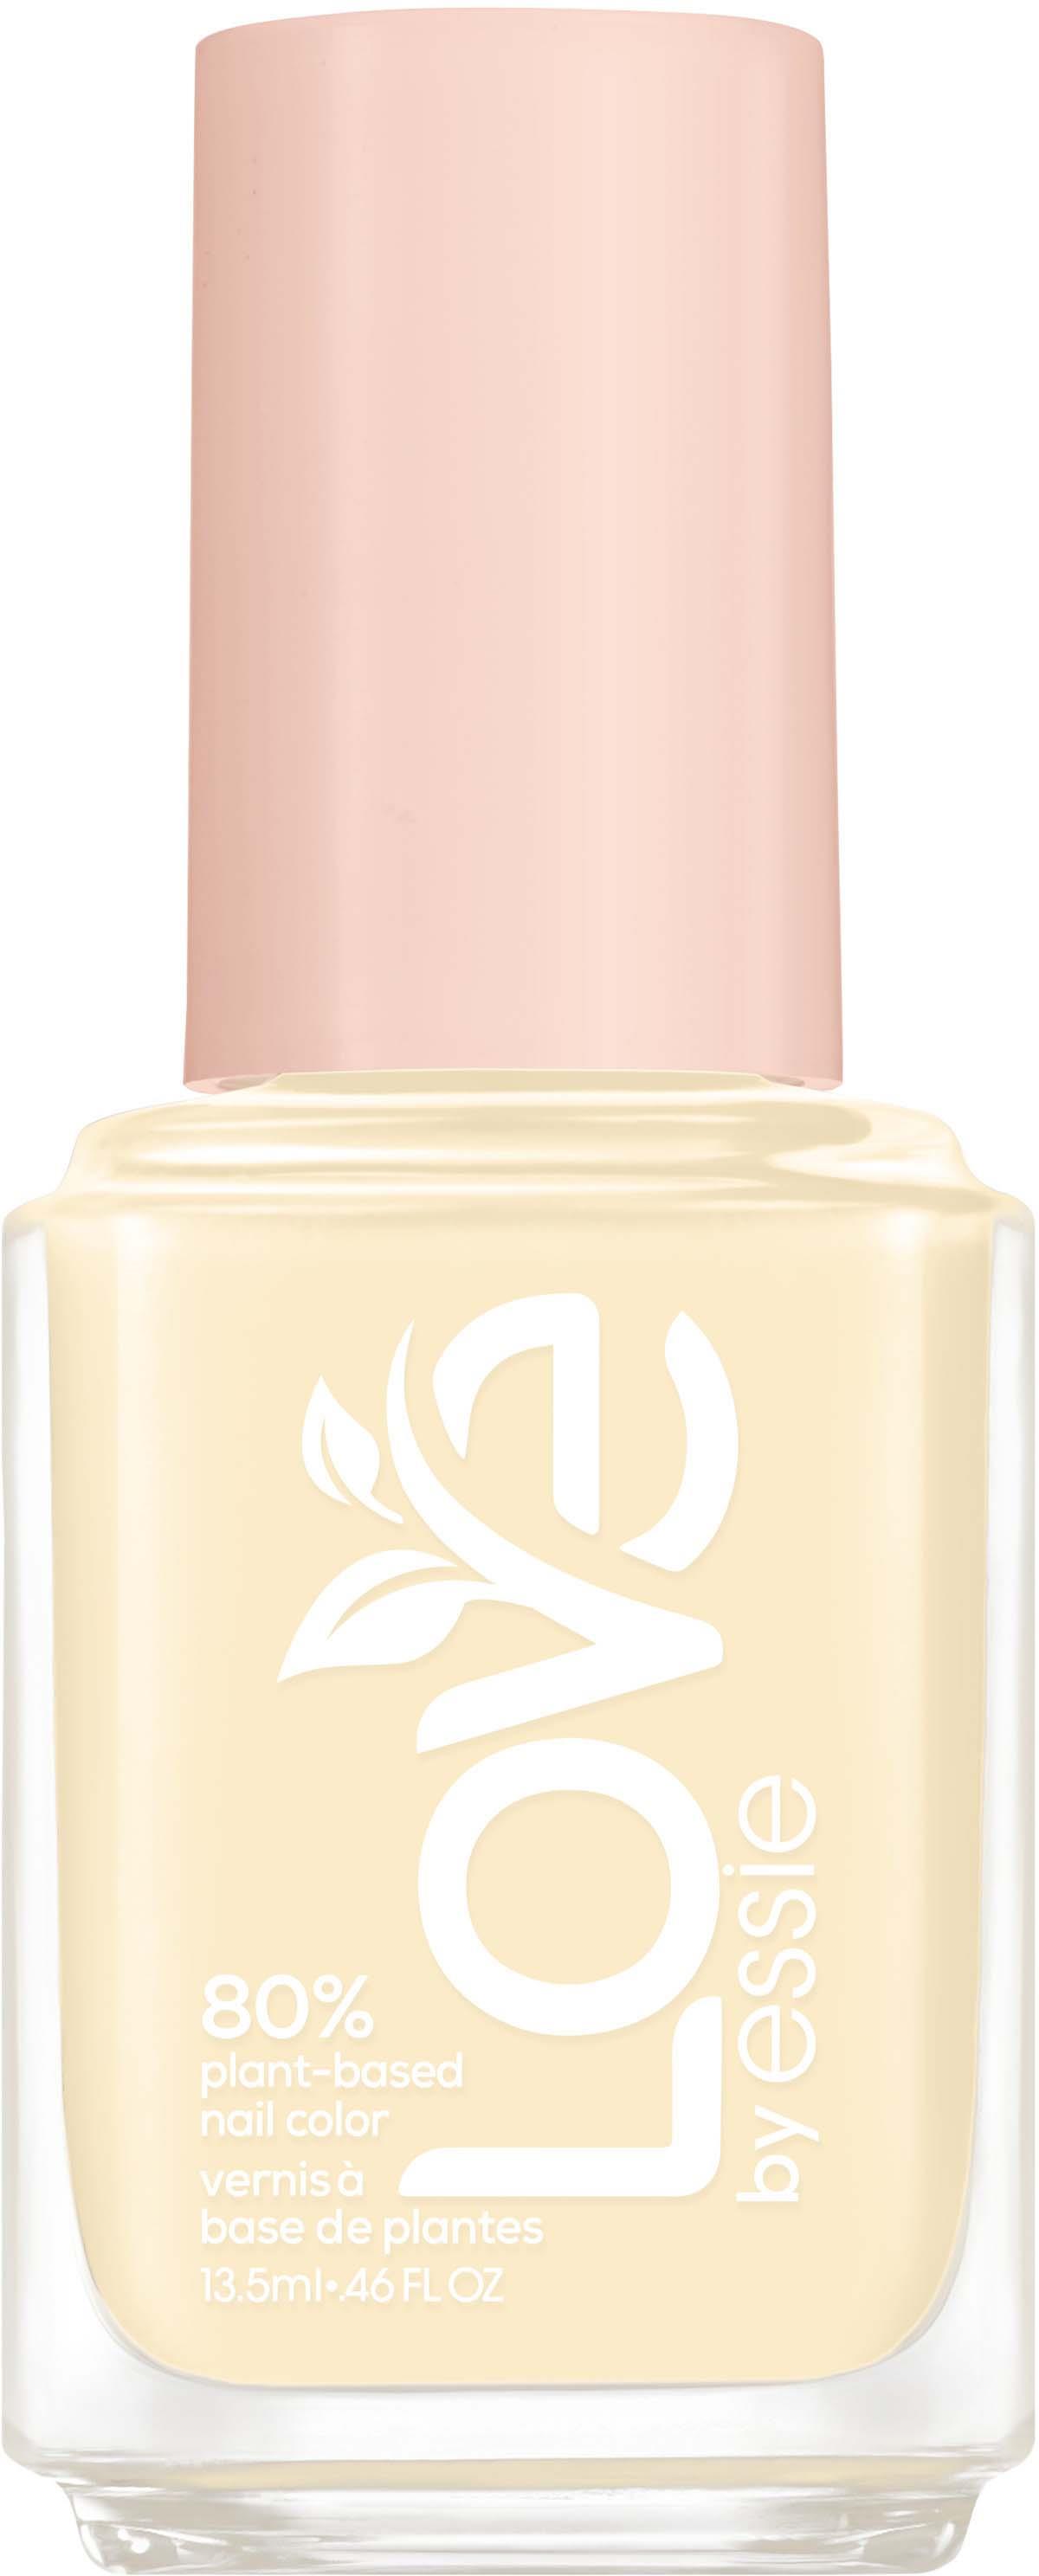 Essie LOVE by Essie 80% Plant-based Nail Color 230 On The Brighter Side